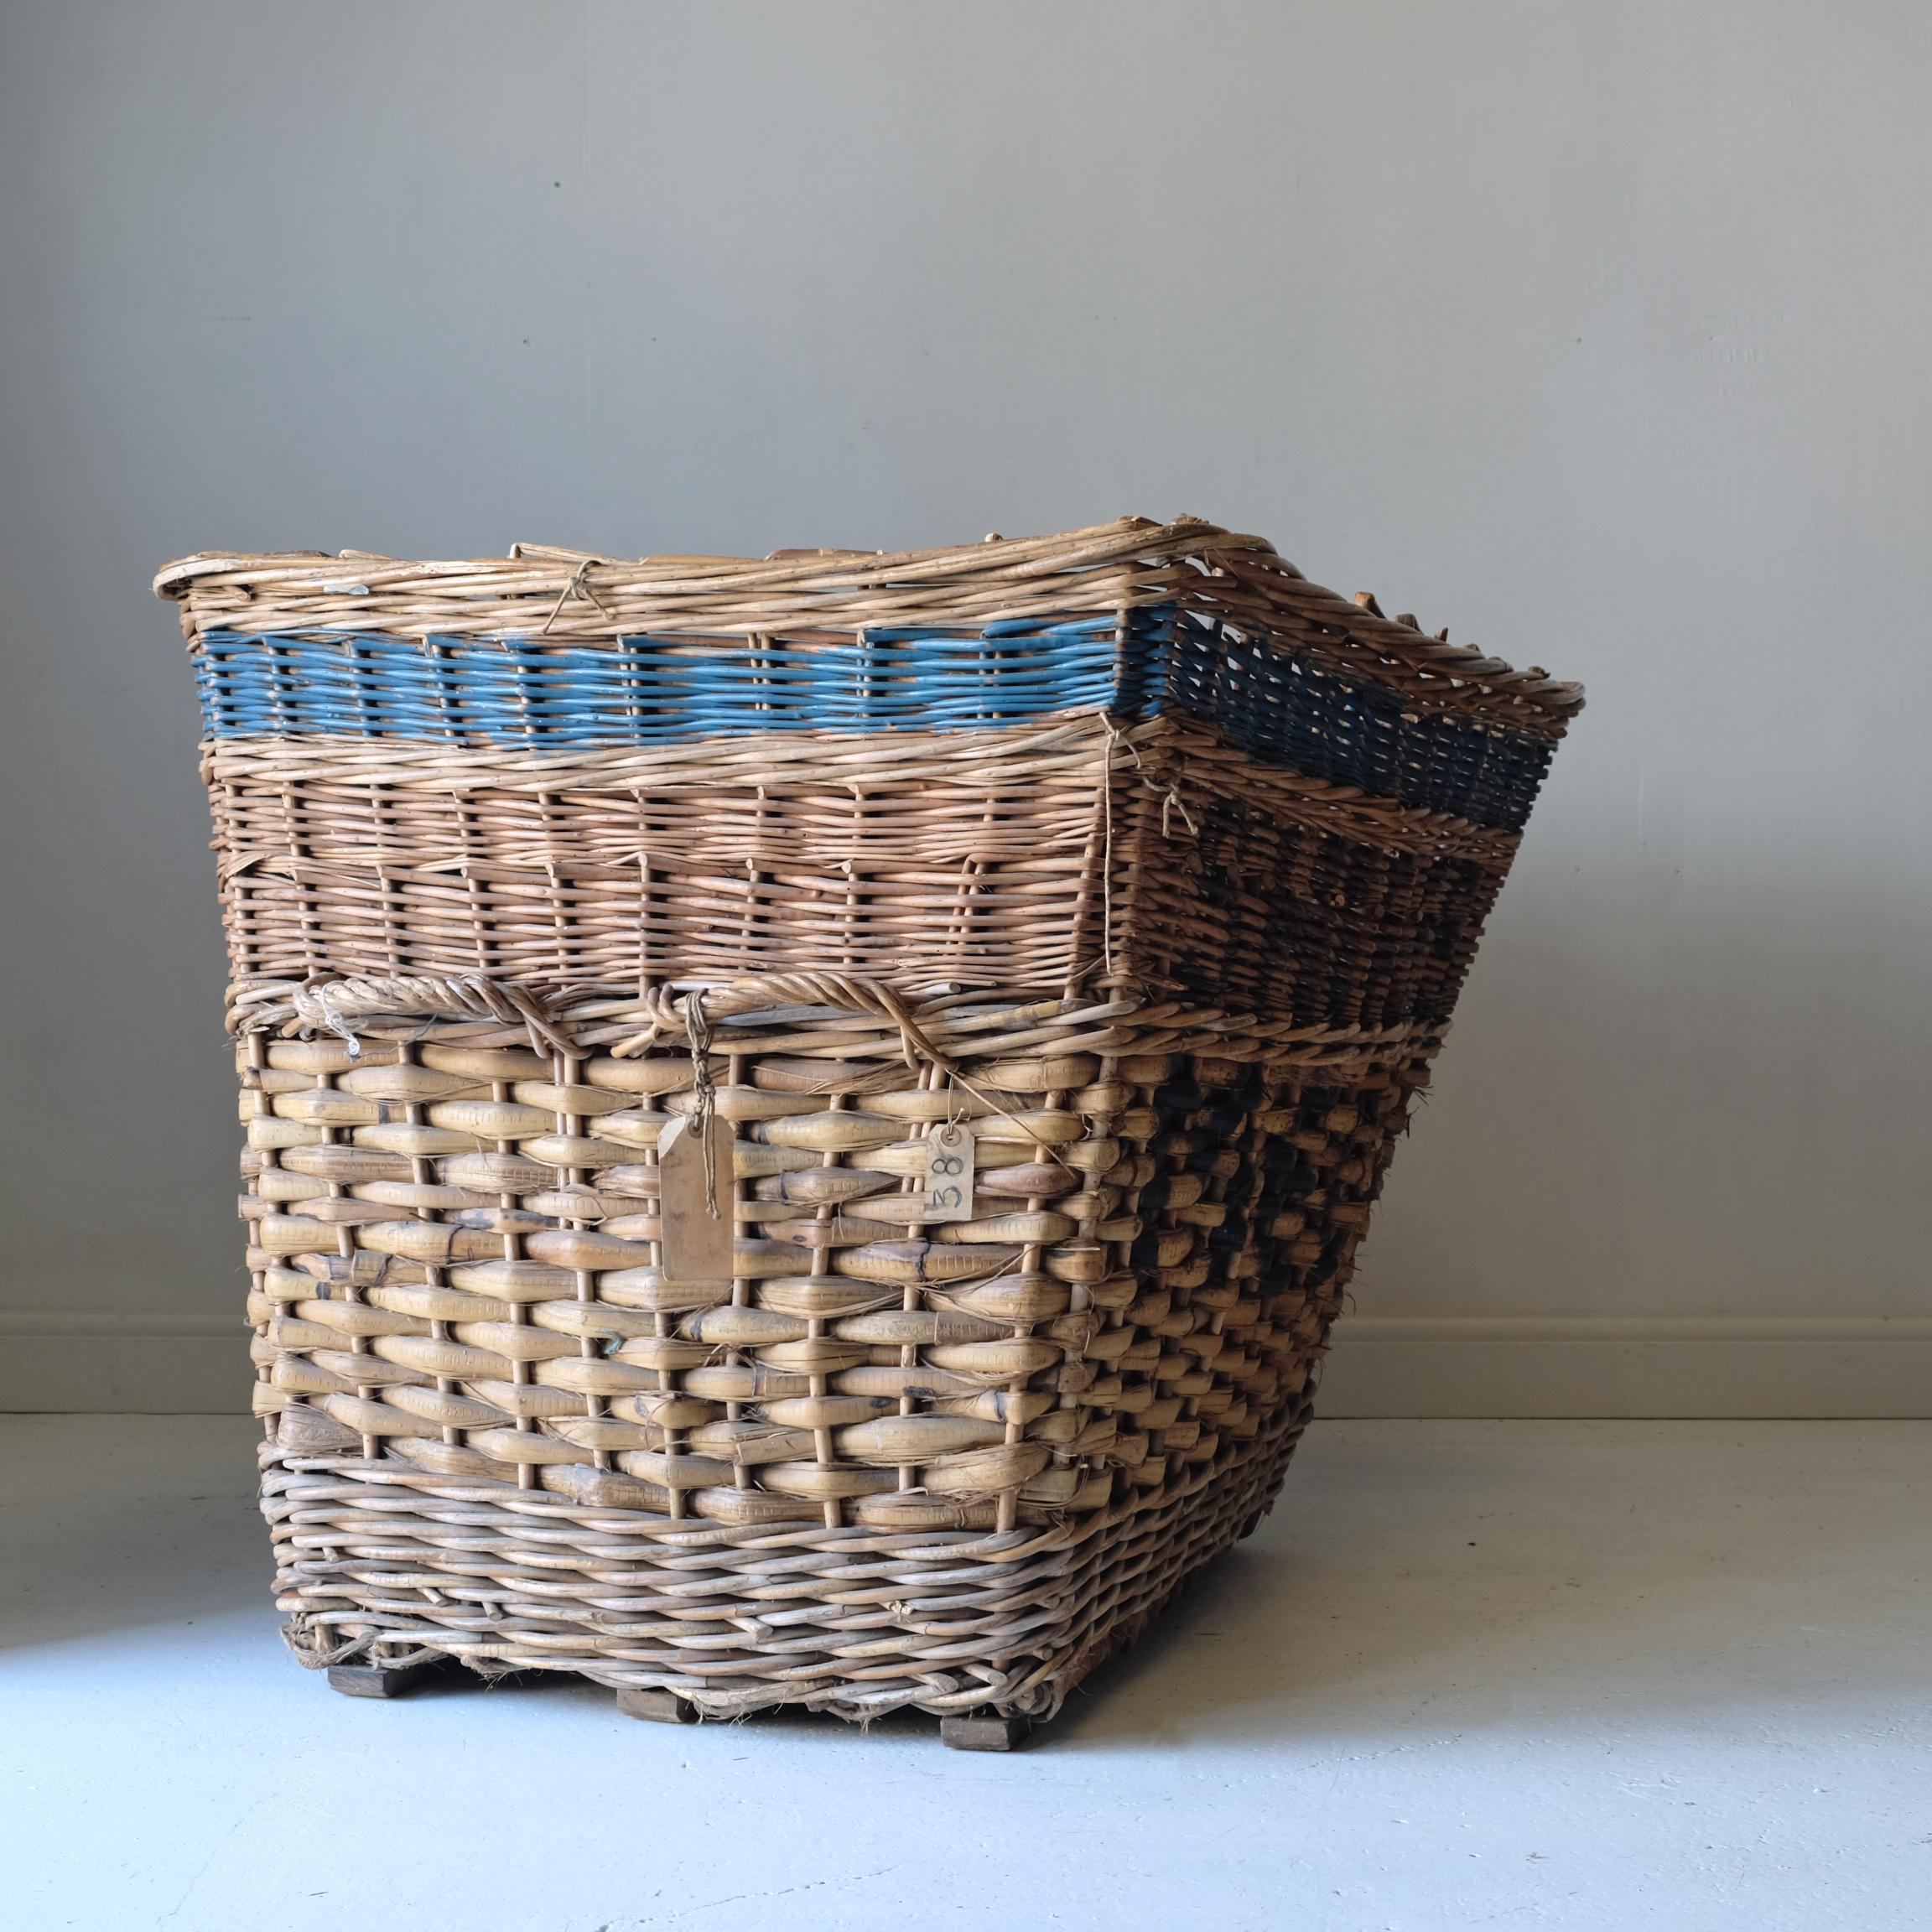 A huge early 20th century Industrial mill basket, originally from James Shires & Sons of Huddersfield, established in 1864. With a wonderfully characterful misshapen appearance from years of abuse in an Industrial setting, the basket remains solid